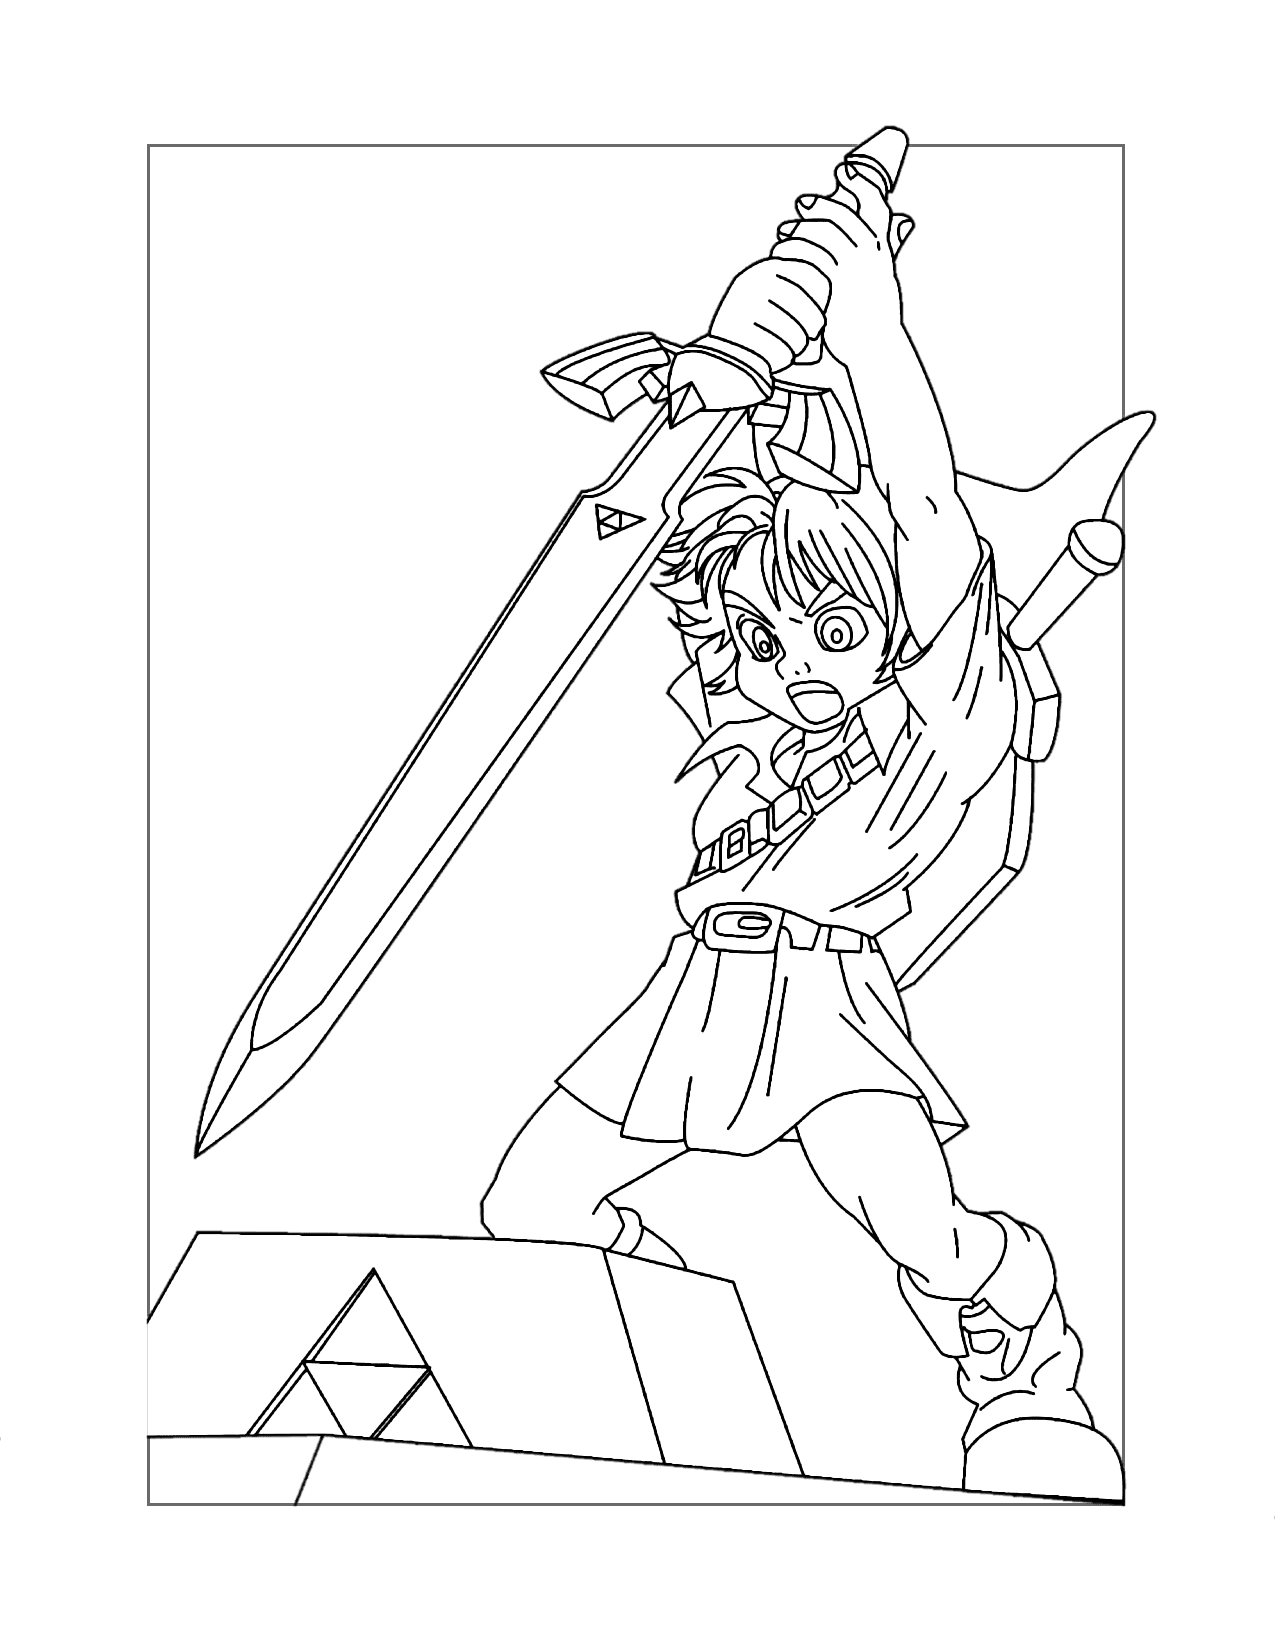 Zelda Action Coloring Page